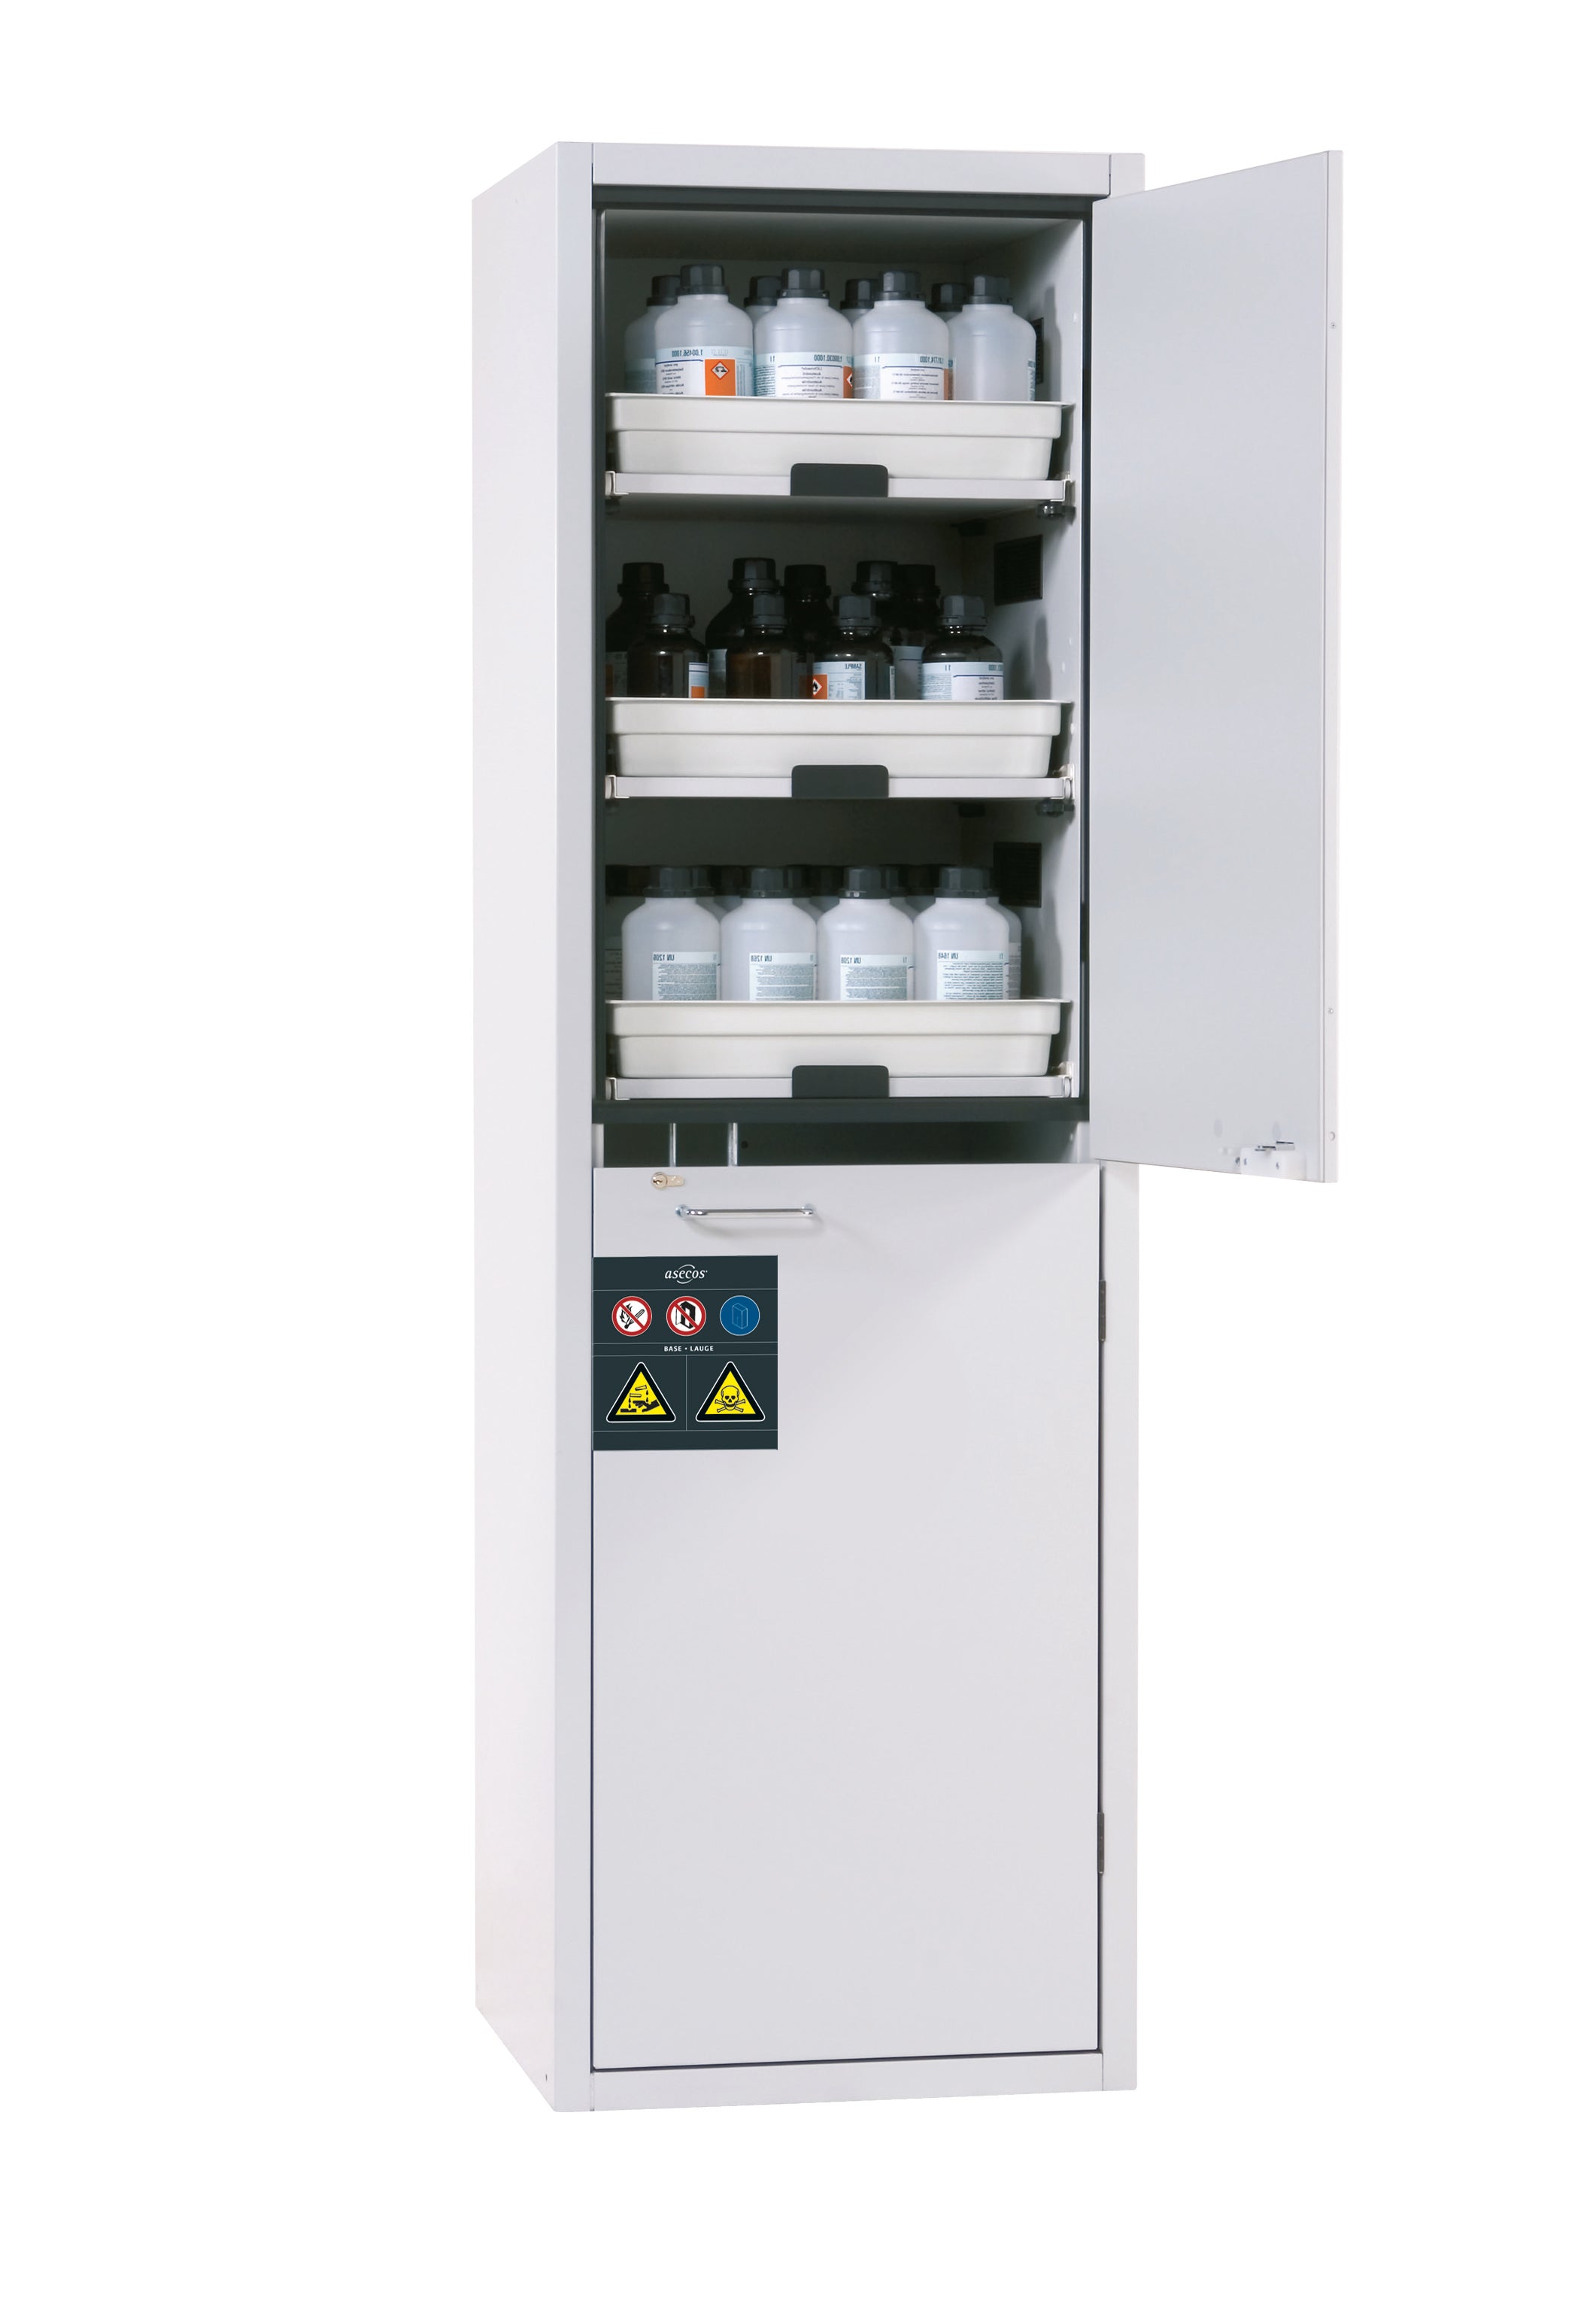 Acid and alkaline cabinet SL-CLASSIC model SL.196.060.MH.R in light gray RAL 7035 with 6x AbZ pull-out shelves (FP plate/polypropylene)